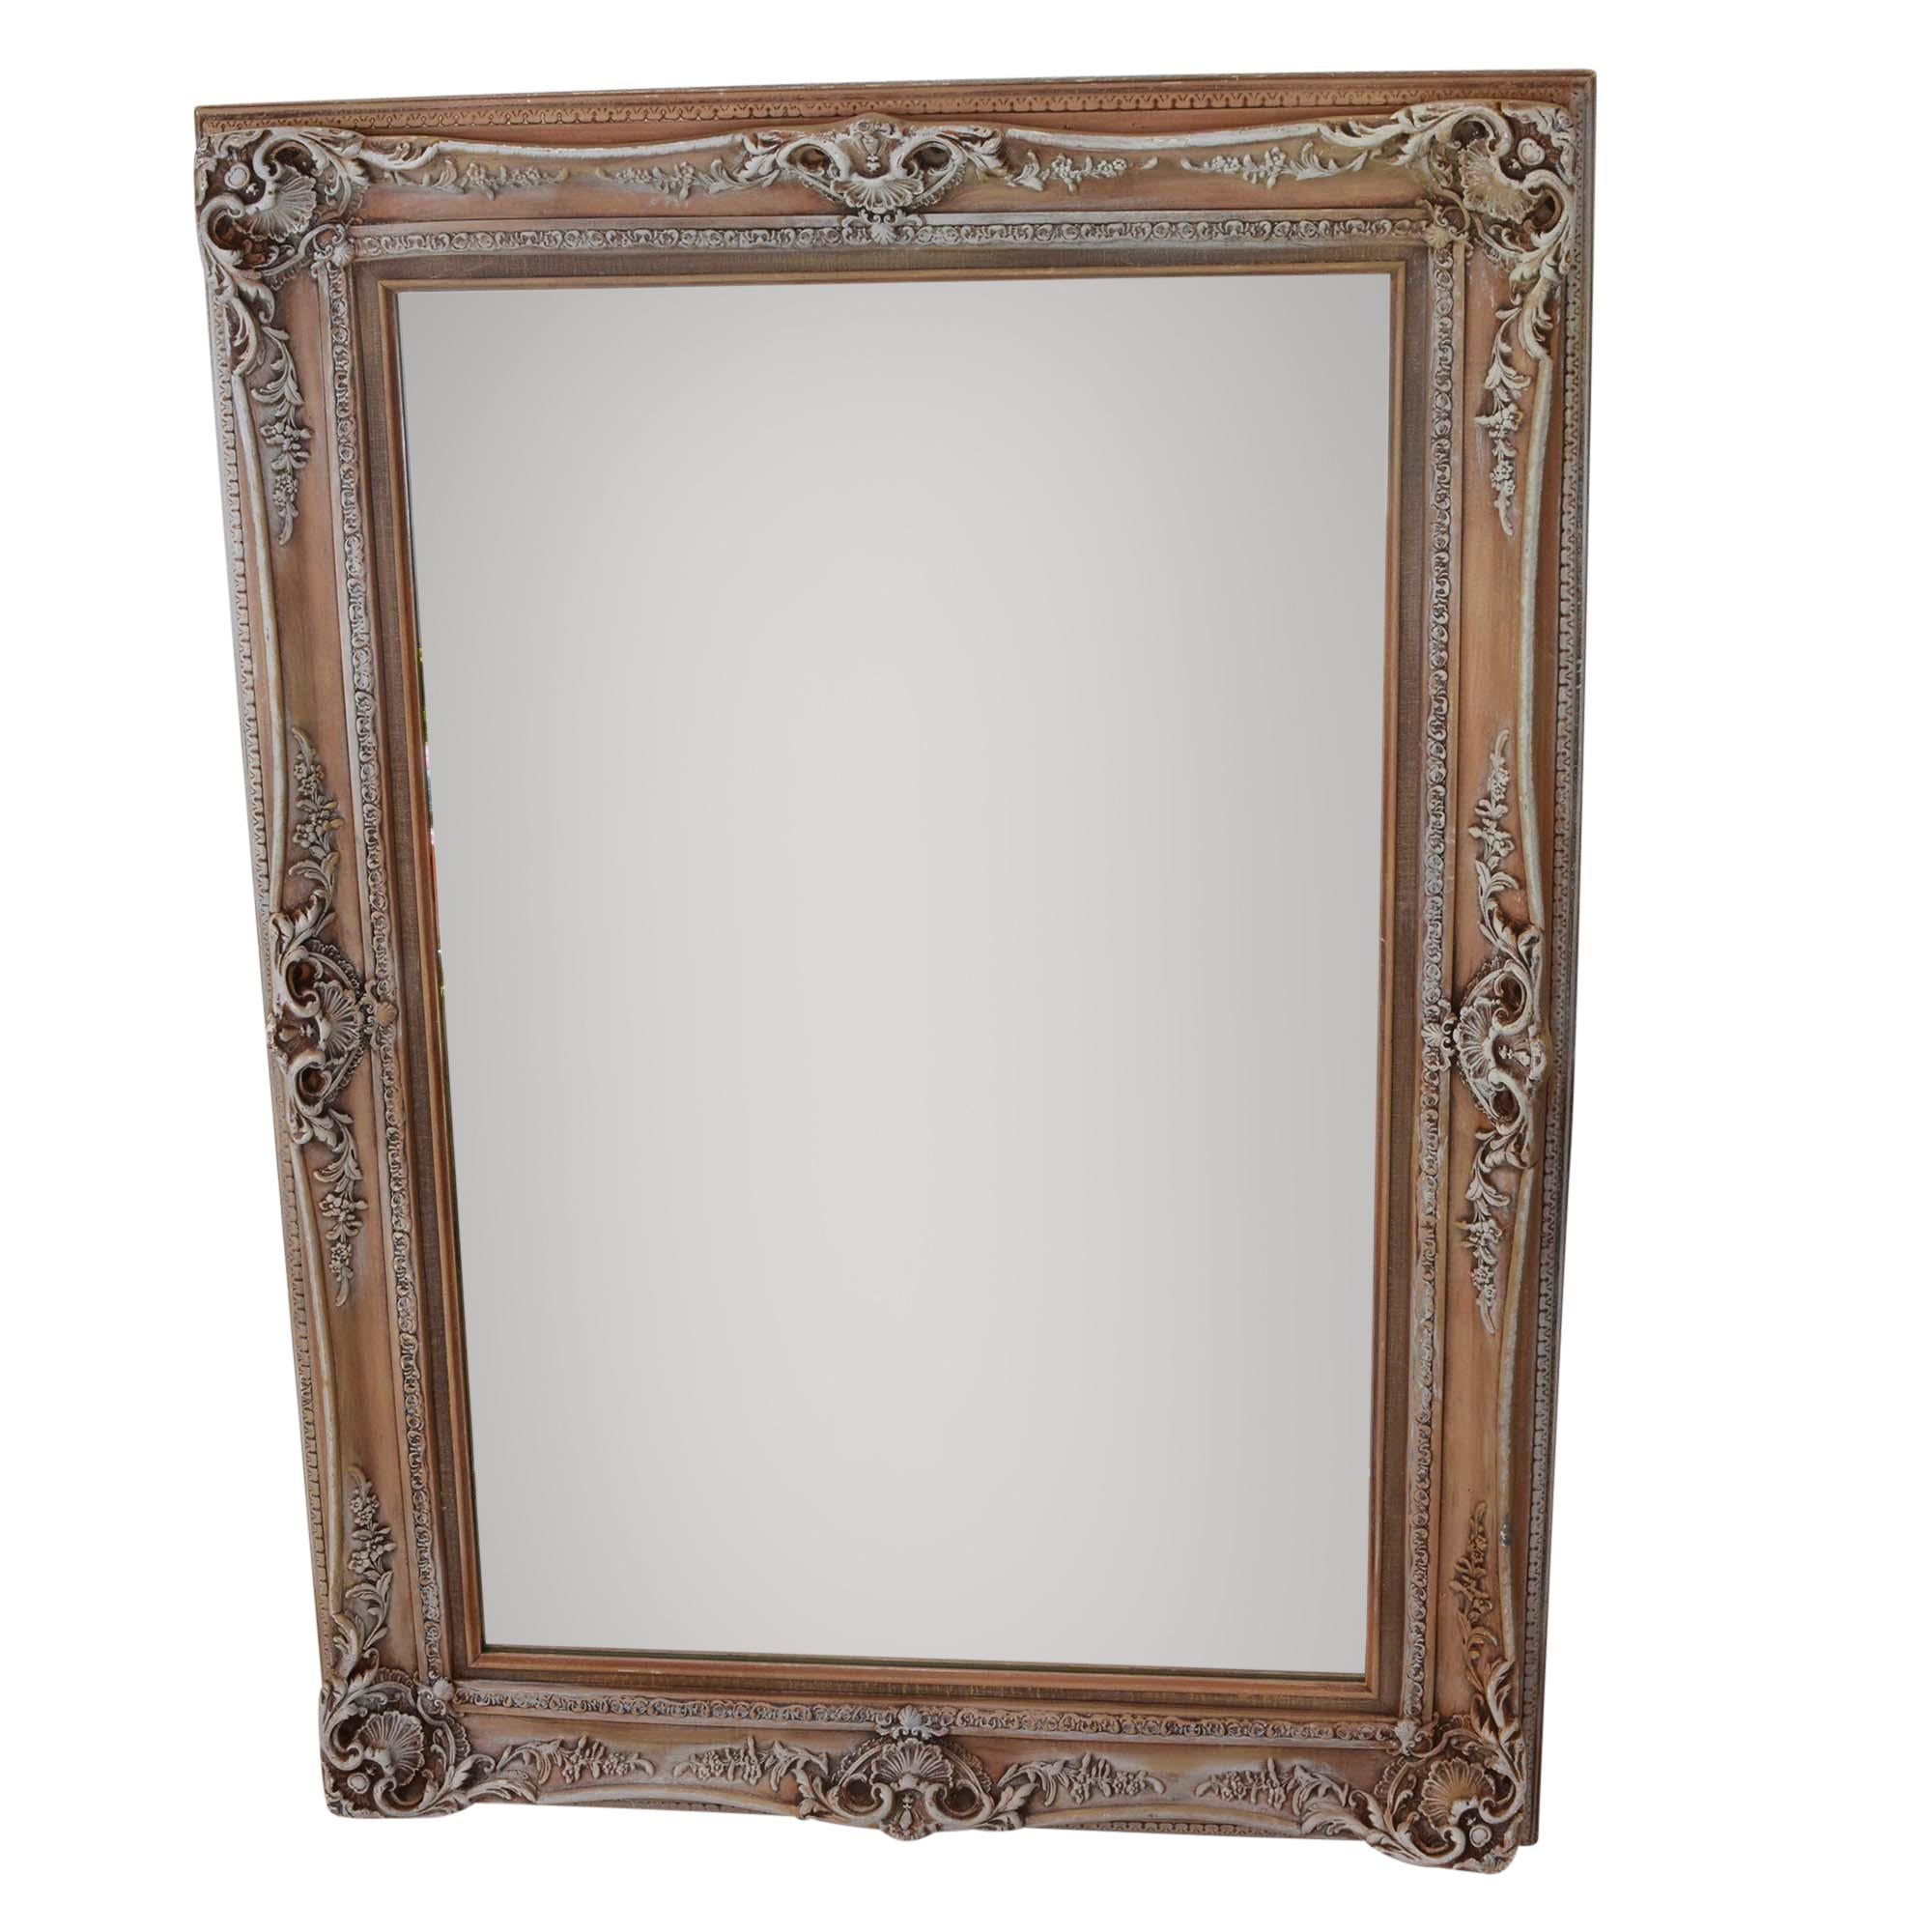 Truly unique antique frames that have been updated with new mirrors. The frames feature three dimensional detail and a narrow taupe color fabric mat on the interior. 

Dimensions: Each measures 44